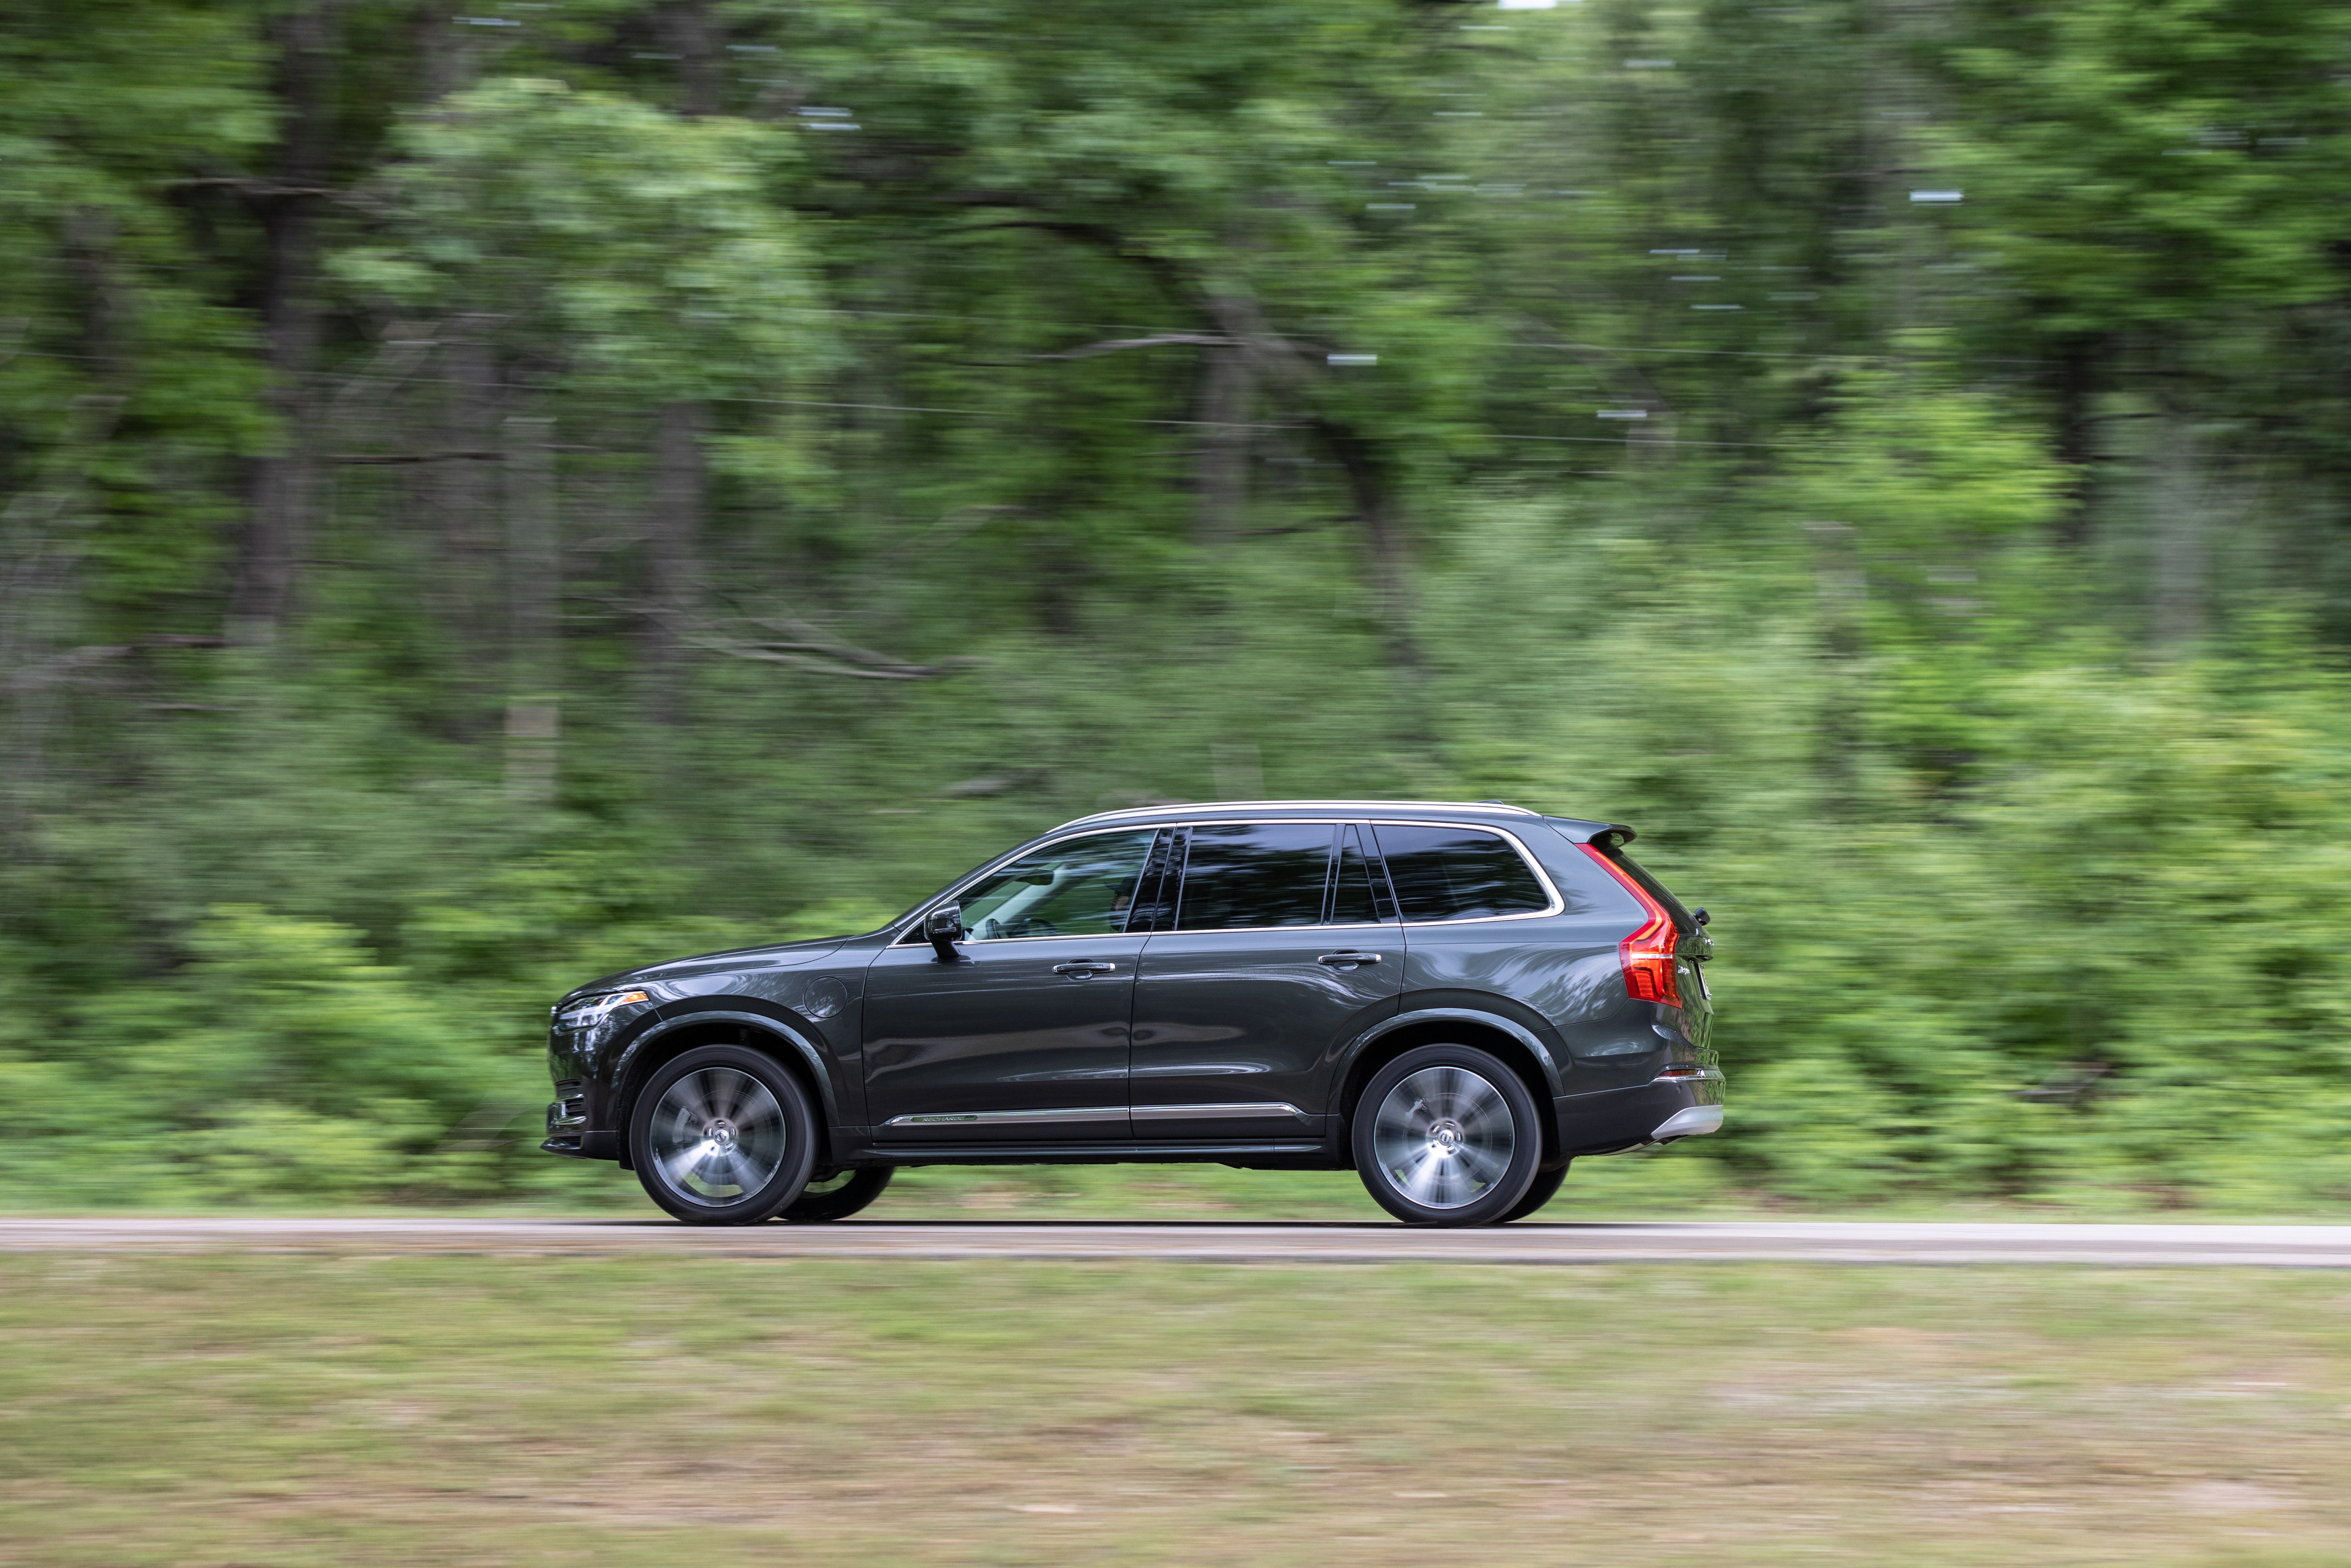 Volvo's New XC90 Excellence: $106,000 of Vroom